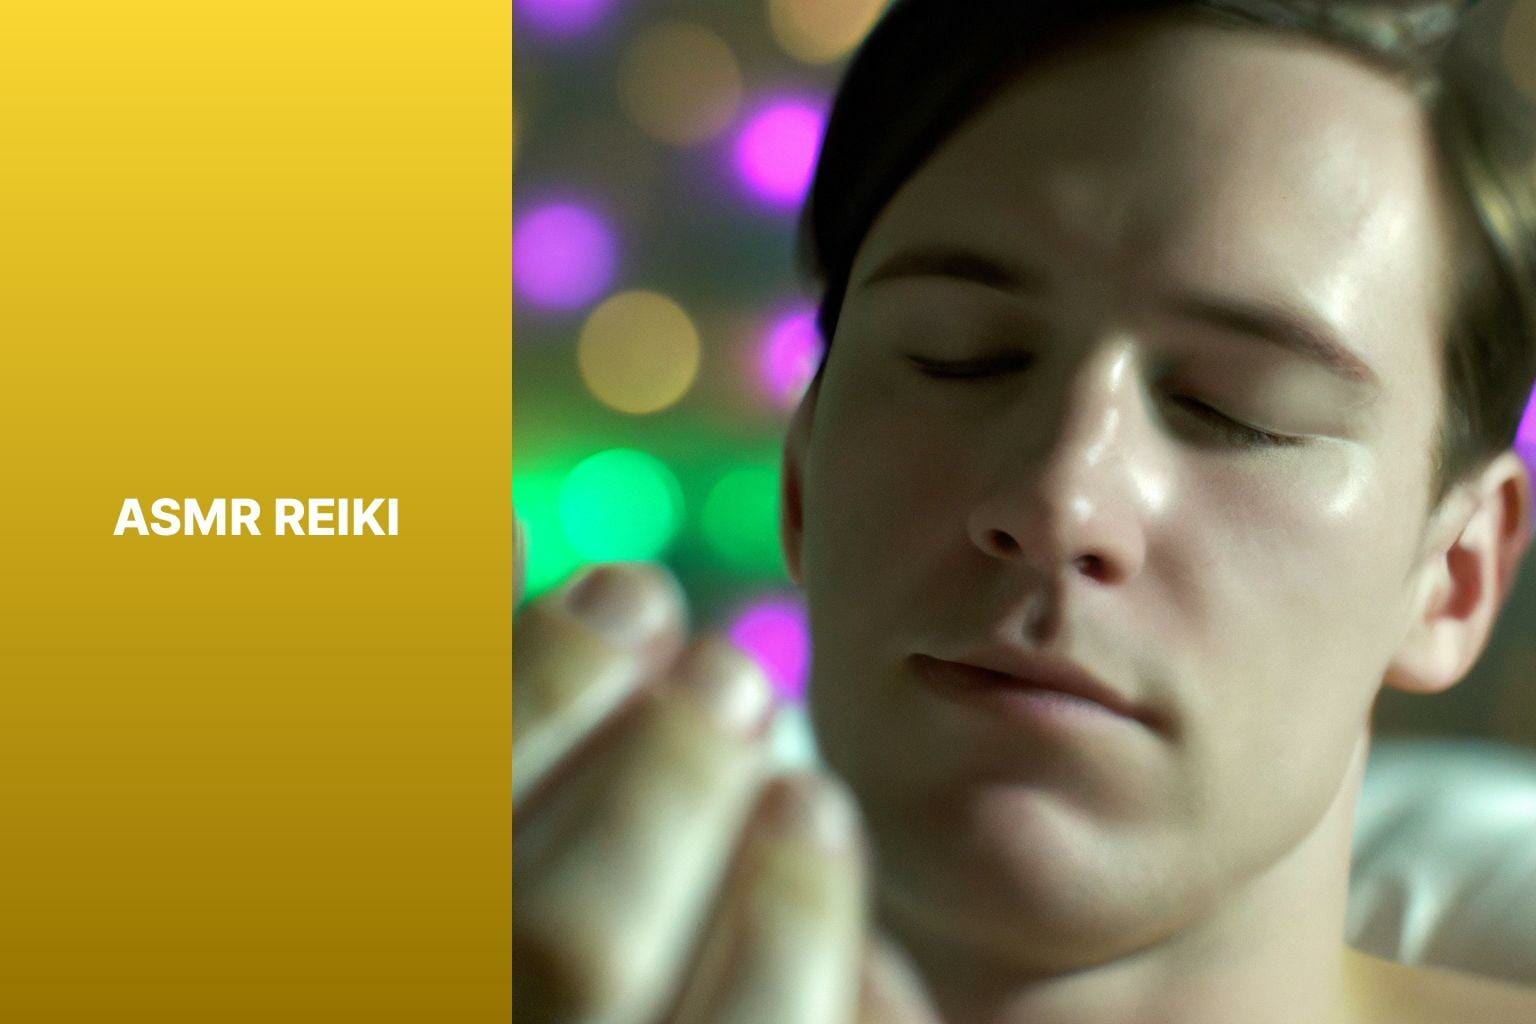 A man practicing Reiki with his eyes closed in front of a colorful background.